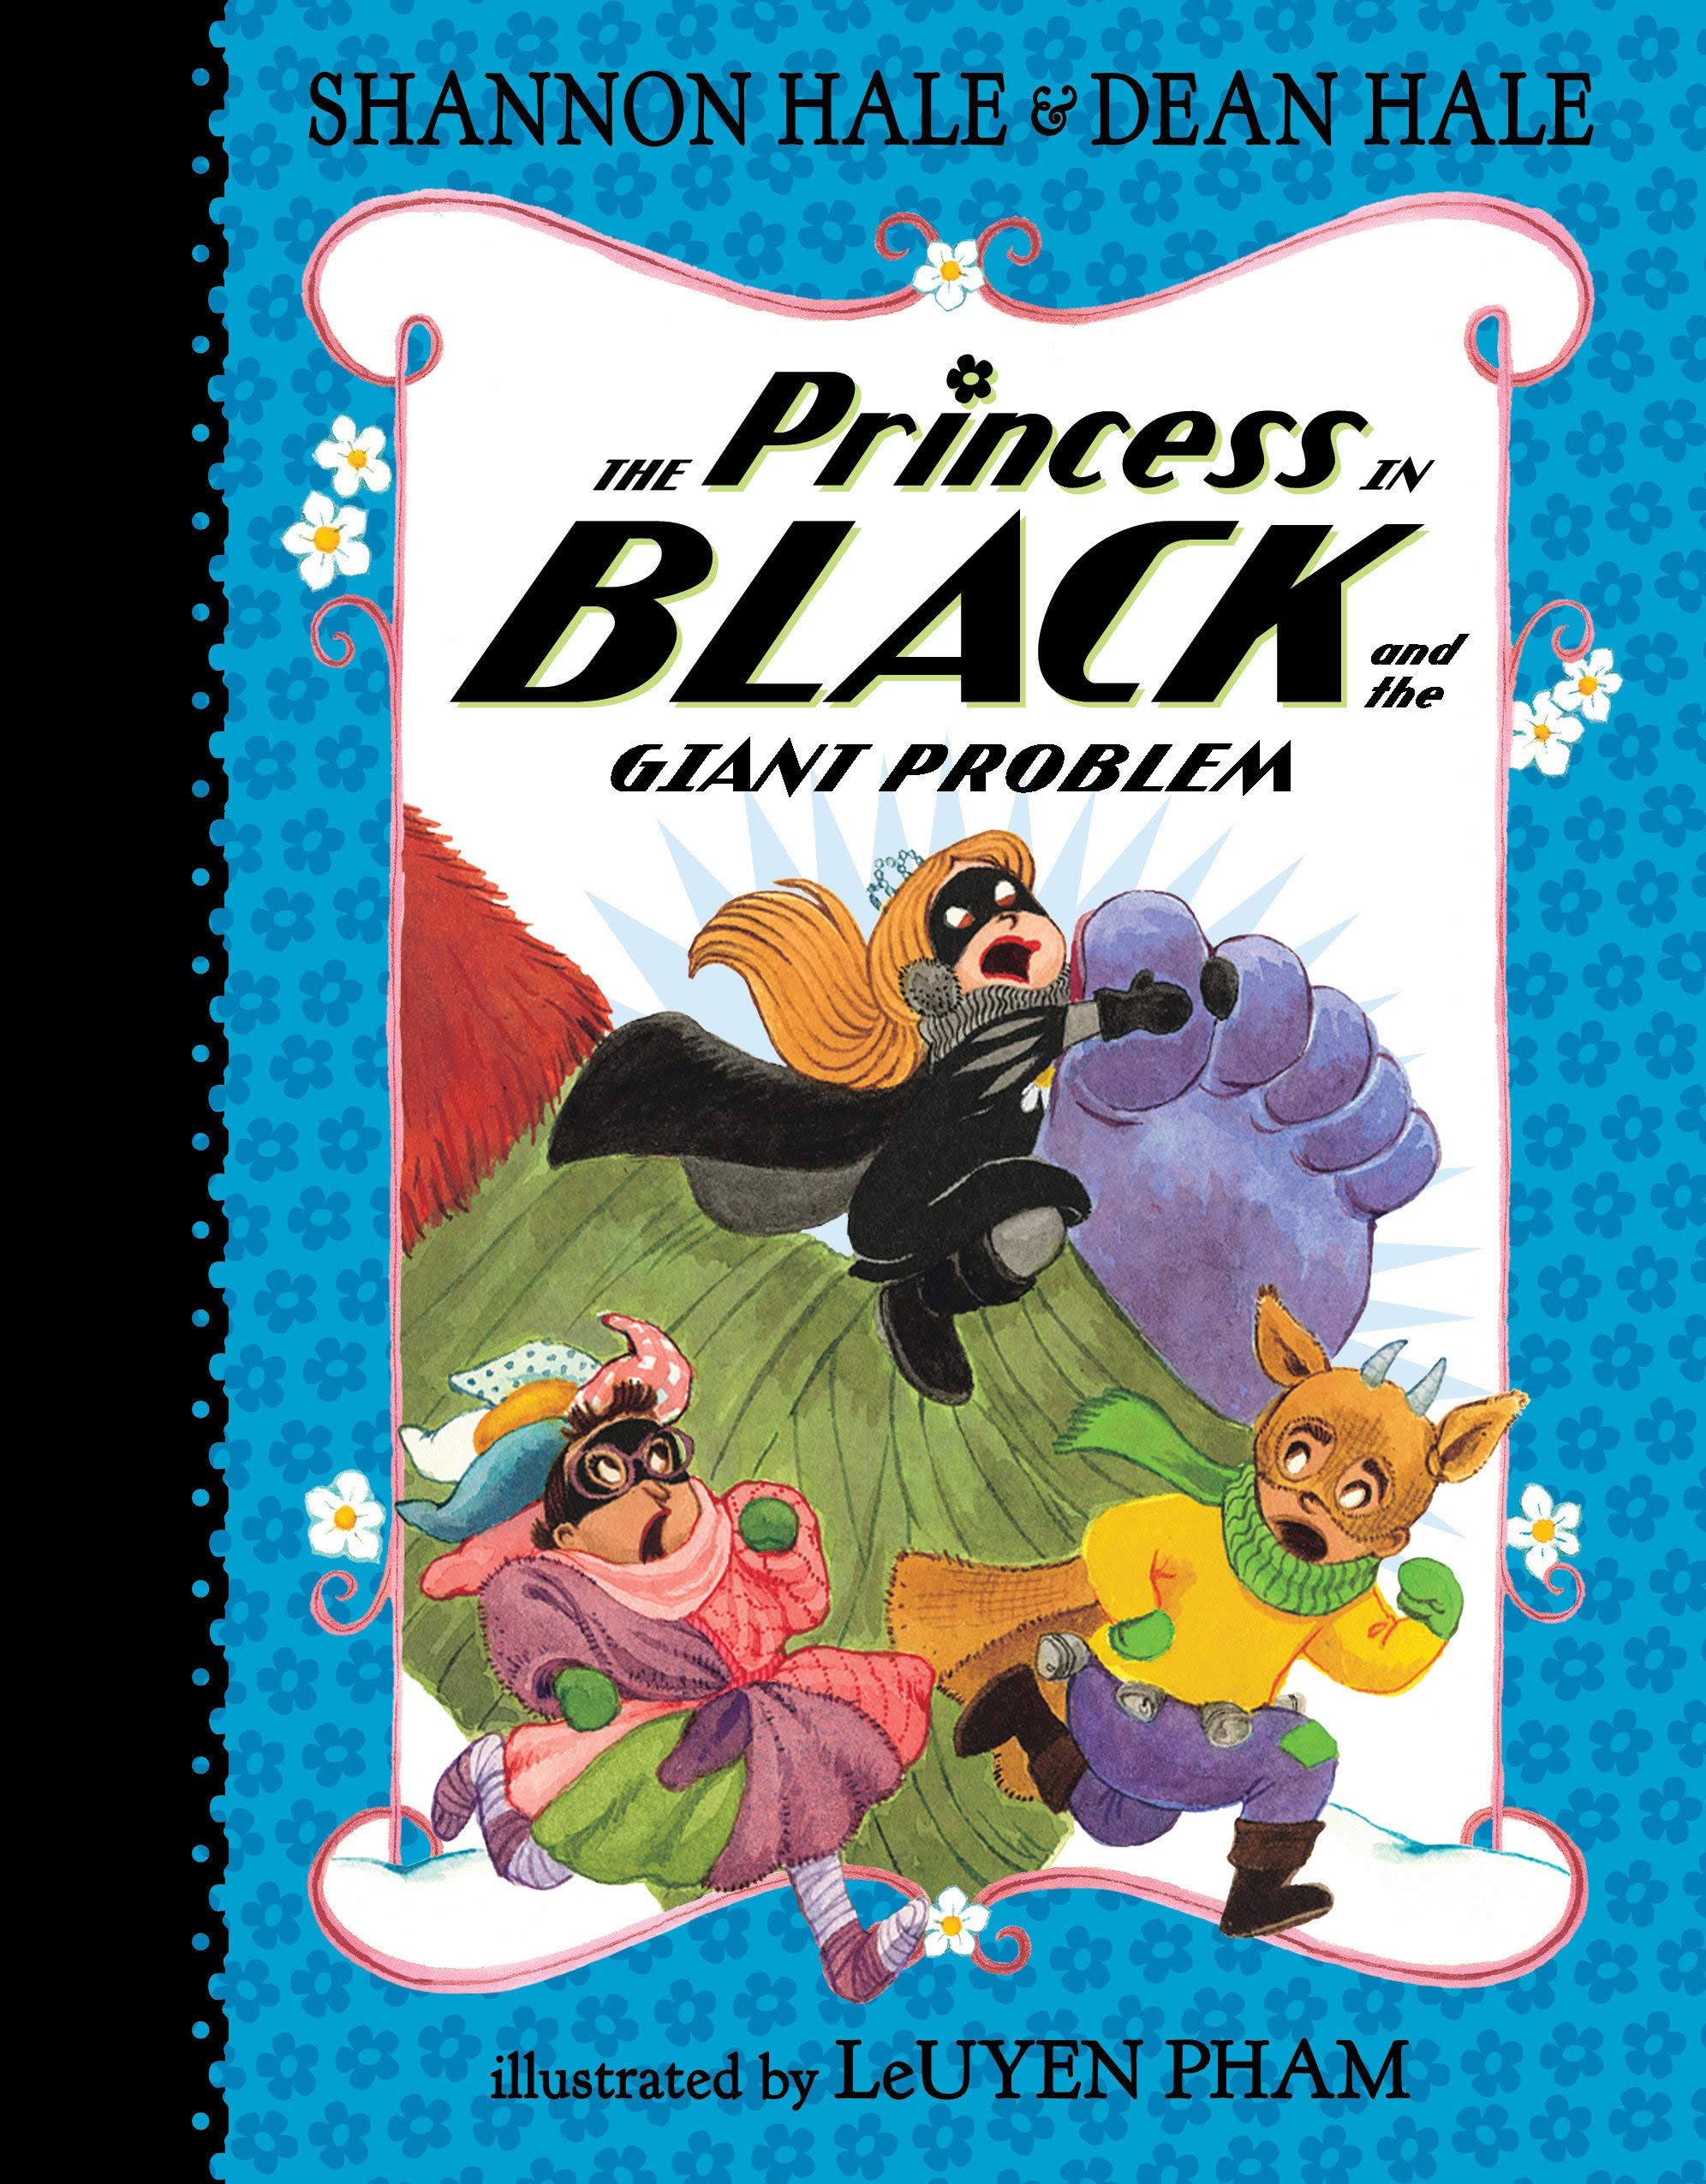 The Princess in Black and the Giant Problem [Book]